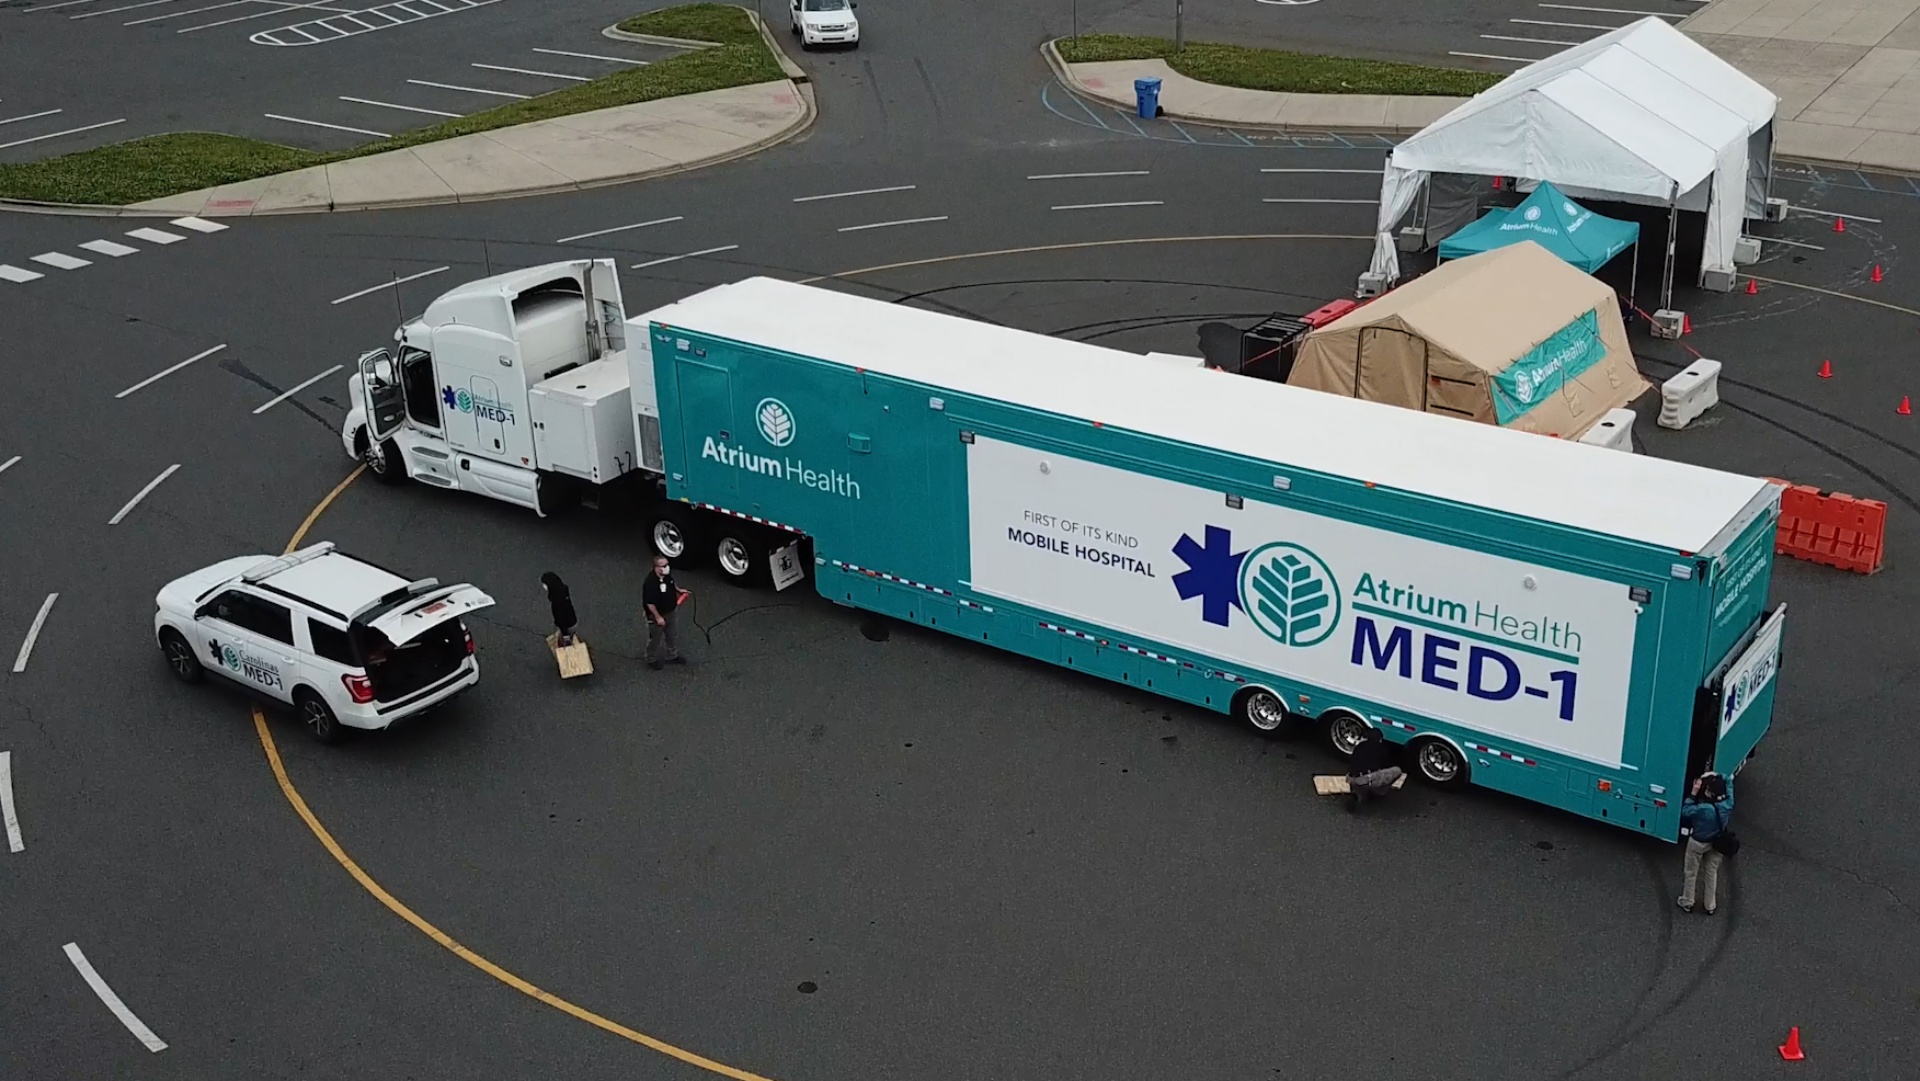 New, one-of-a-kind MED-1 mobile hospital gets its first deployment at Charlotte Motor Speedway for Coca-Cola 600